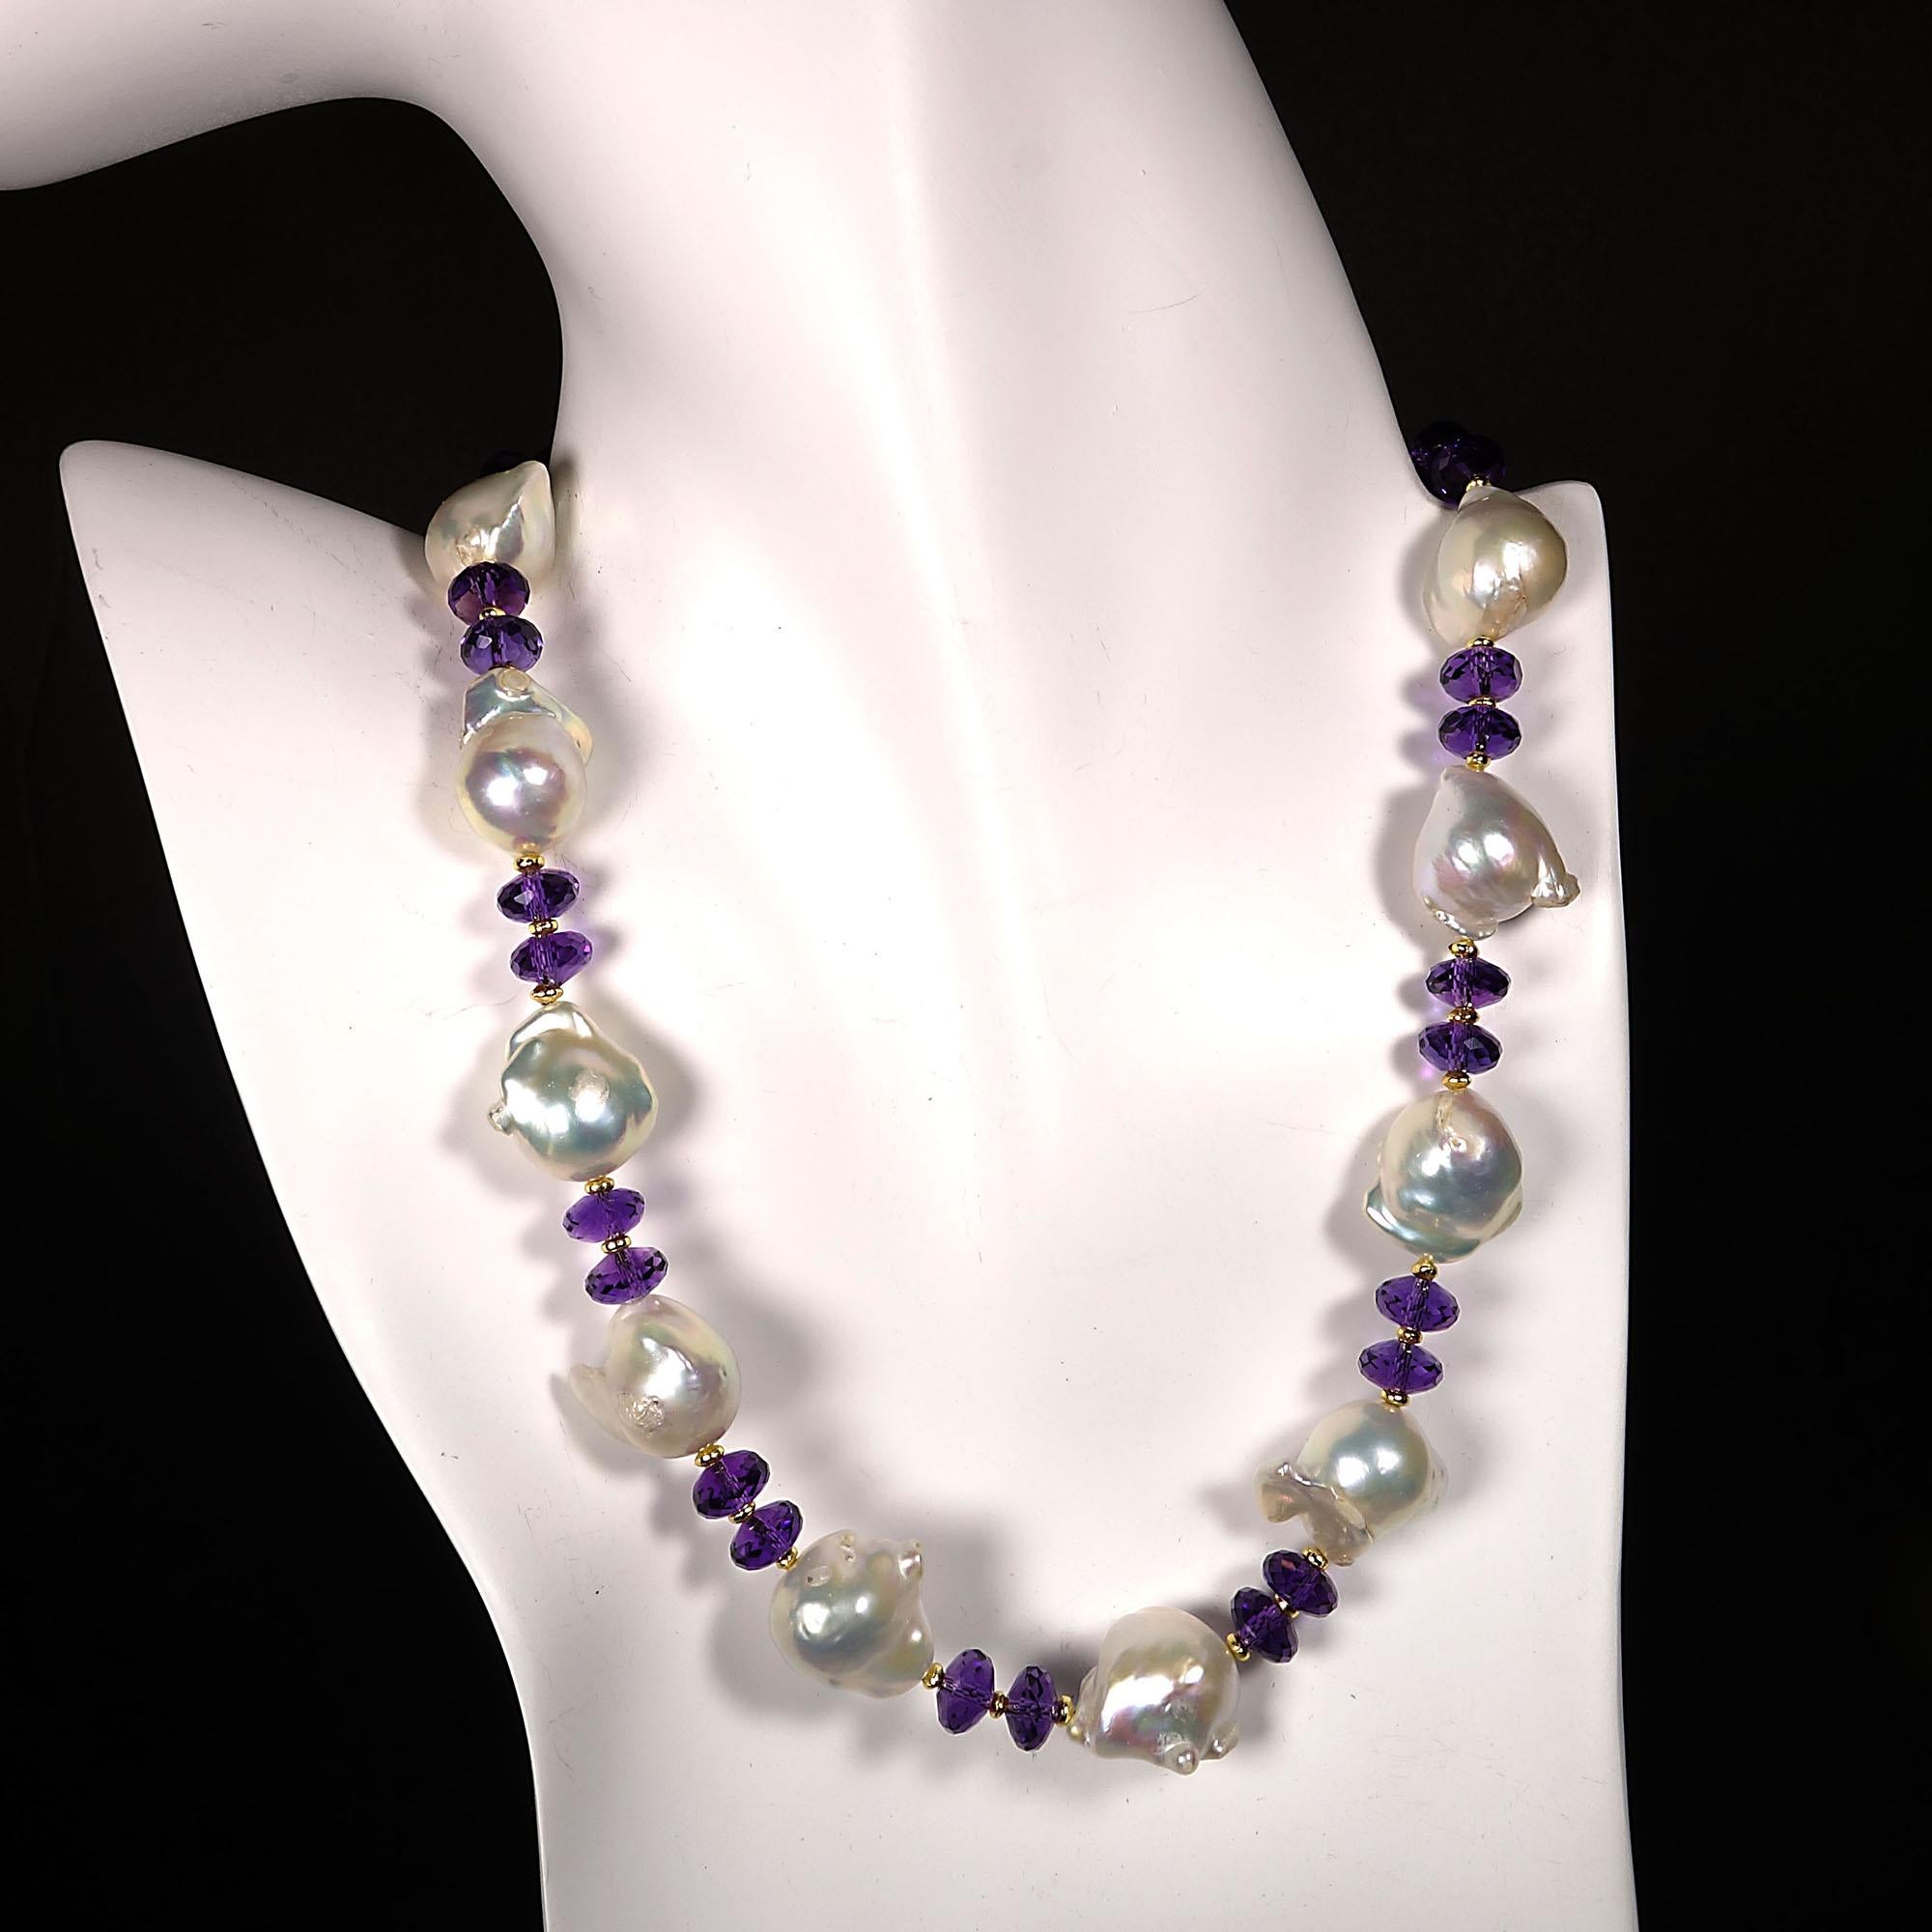 16.5 Inch Choker Necklace of Amethyst Rondelles and White Baroque Pearls.  This handmade stunning choker necklace features sparkling faceted Amethyst rondelles, 8MM, and iridescent White Baroque Pearls.  The purple in the Amethyst brings out the